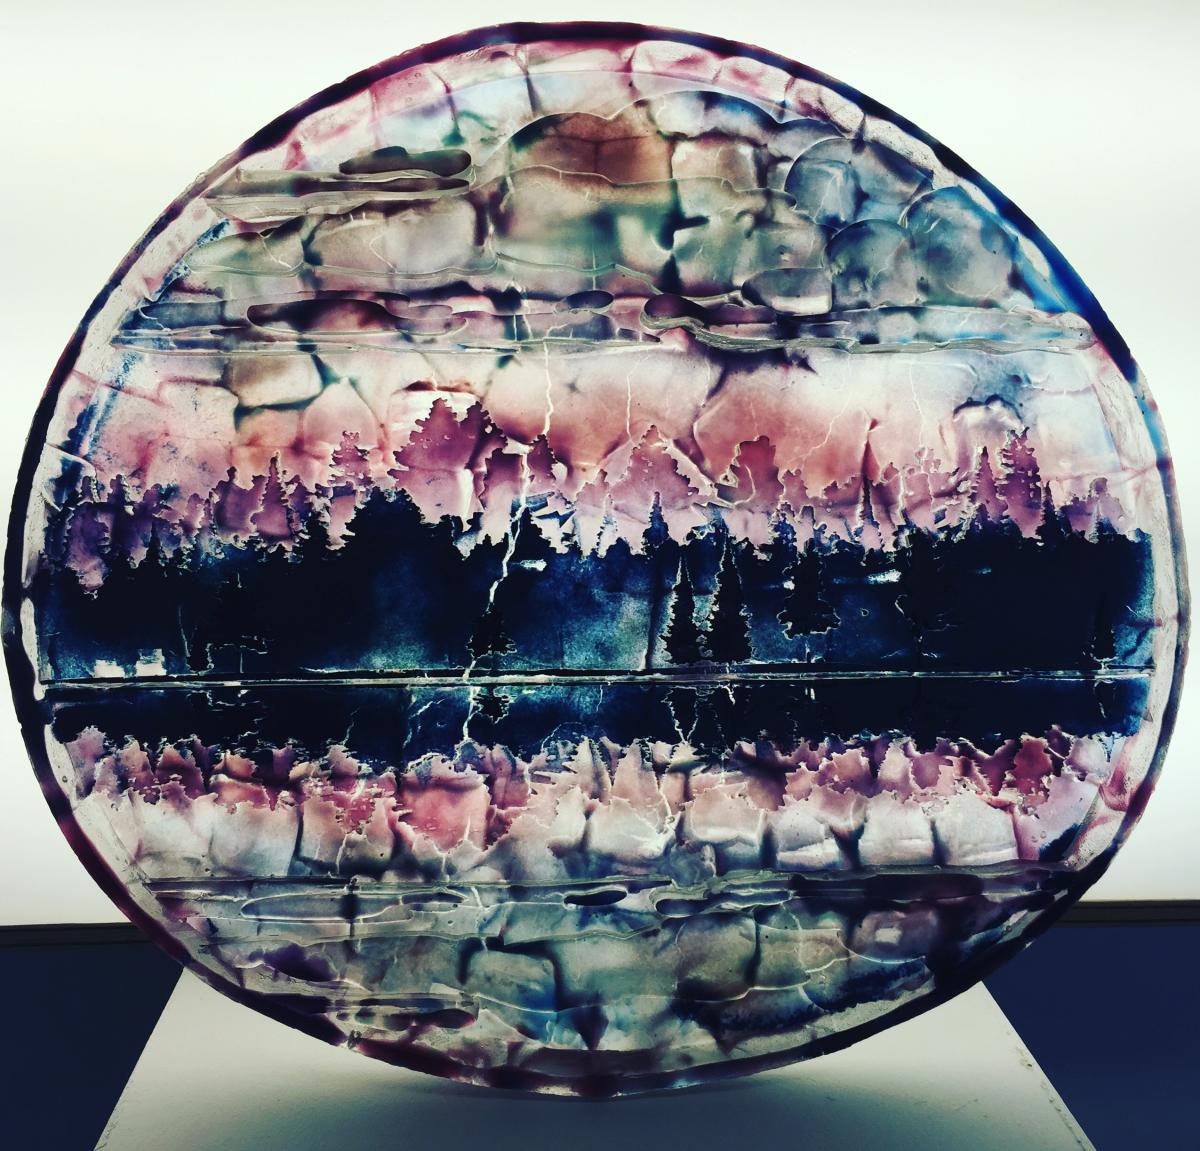 An artwork made of glass that's pink and blue